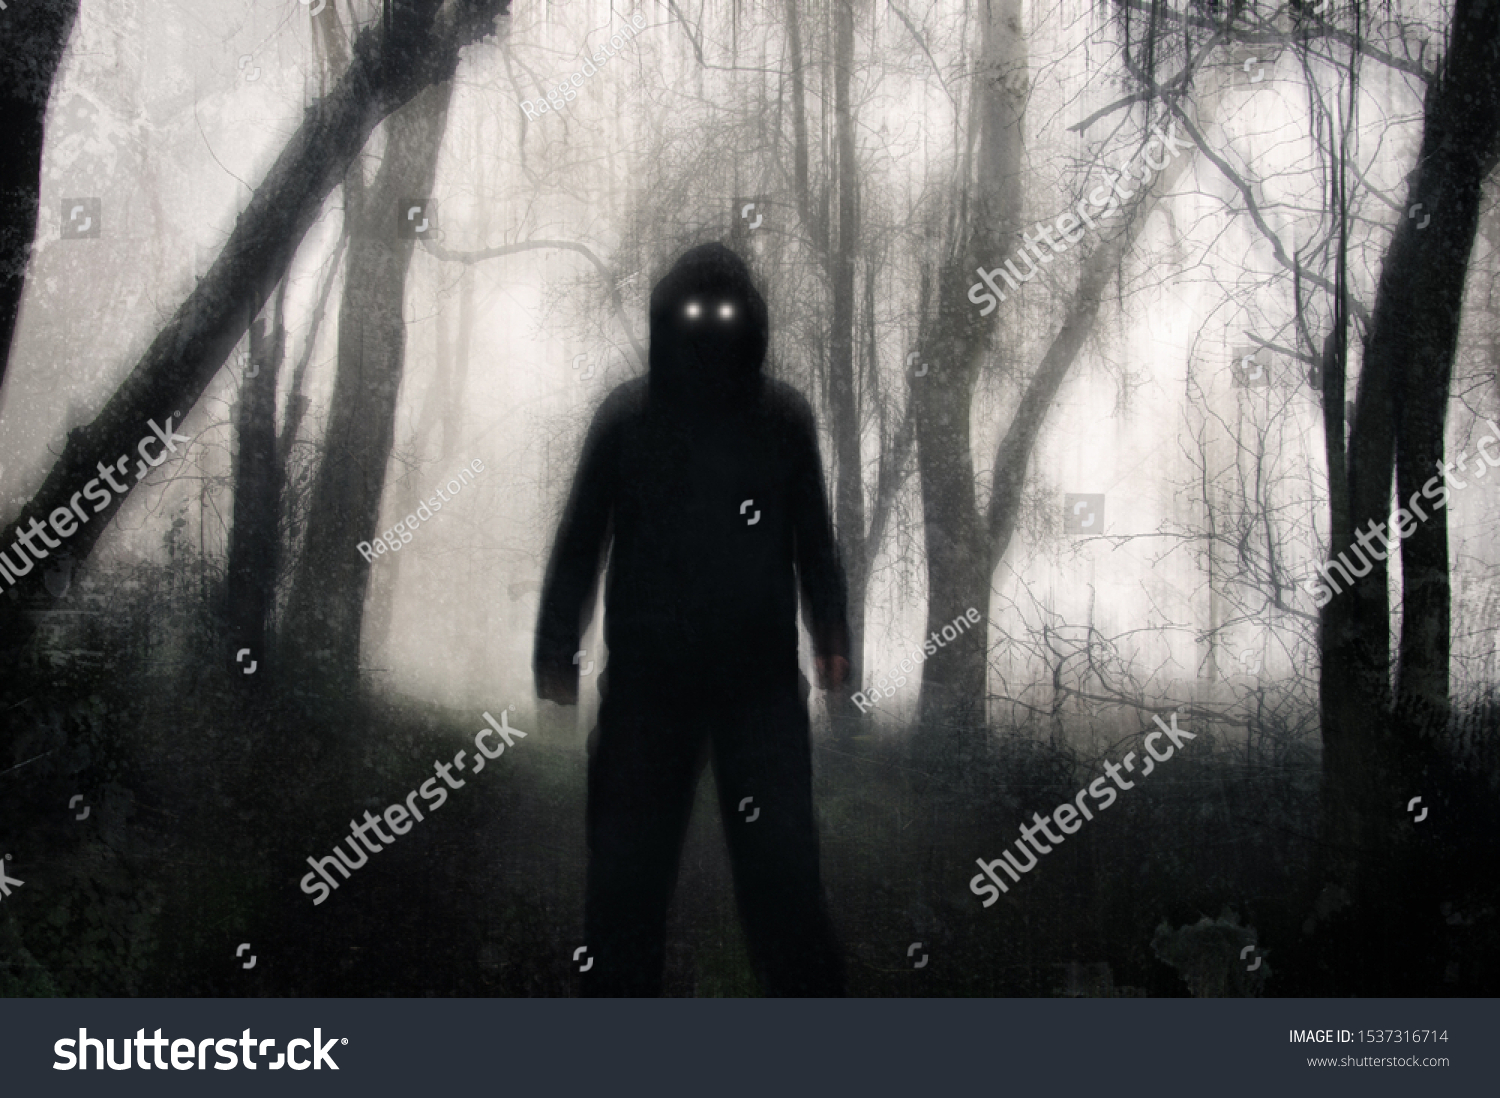 A horror concept. A silhouetted hooded figure, standing in a winter forest, with glowing scary eyes. With a grunge, texture, blurred edit #1537316714